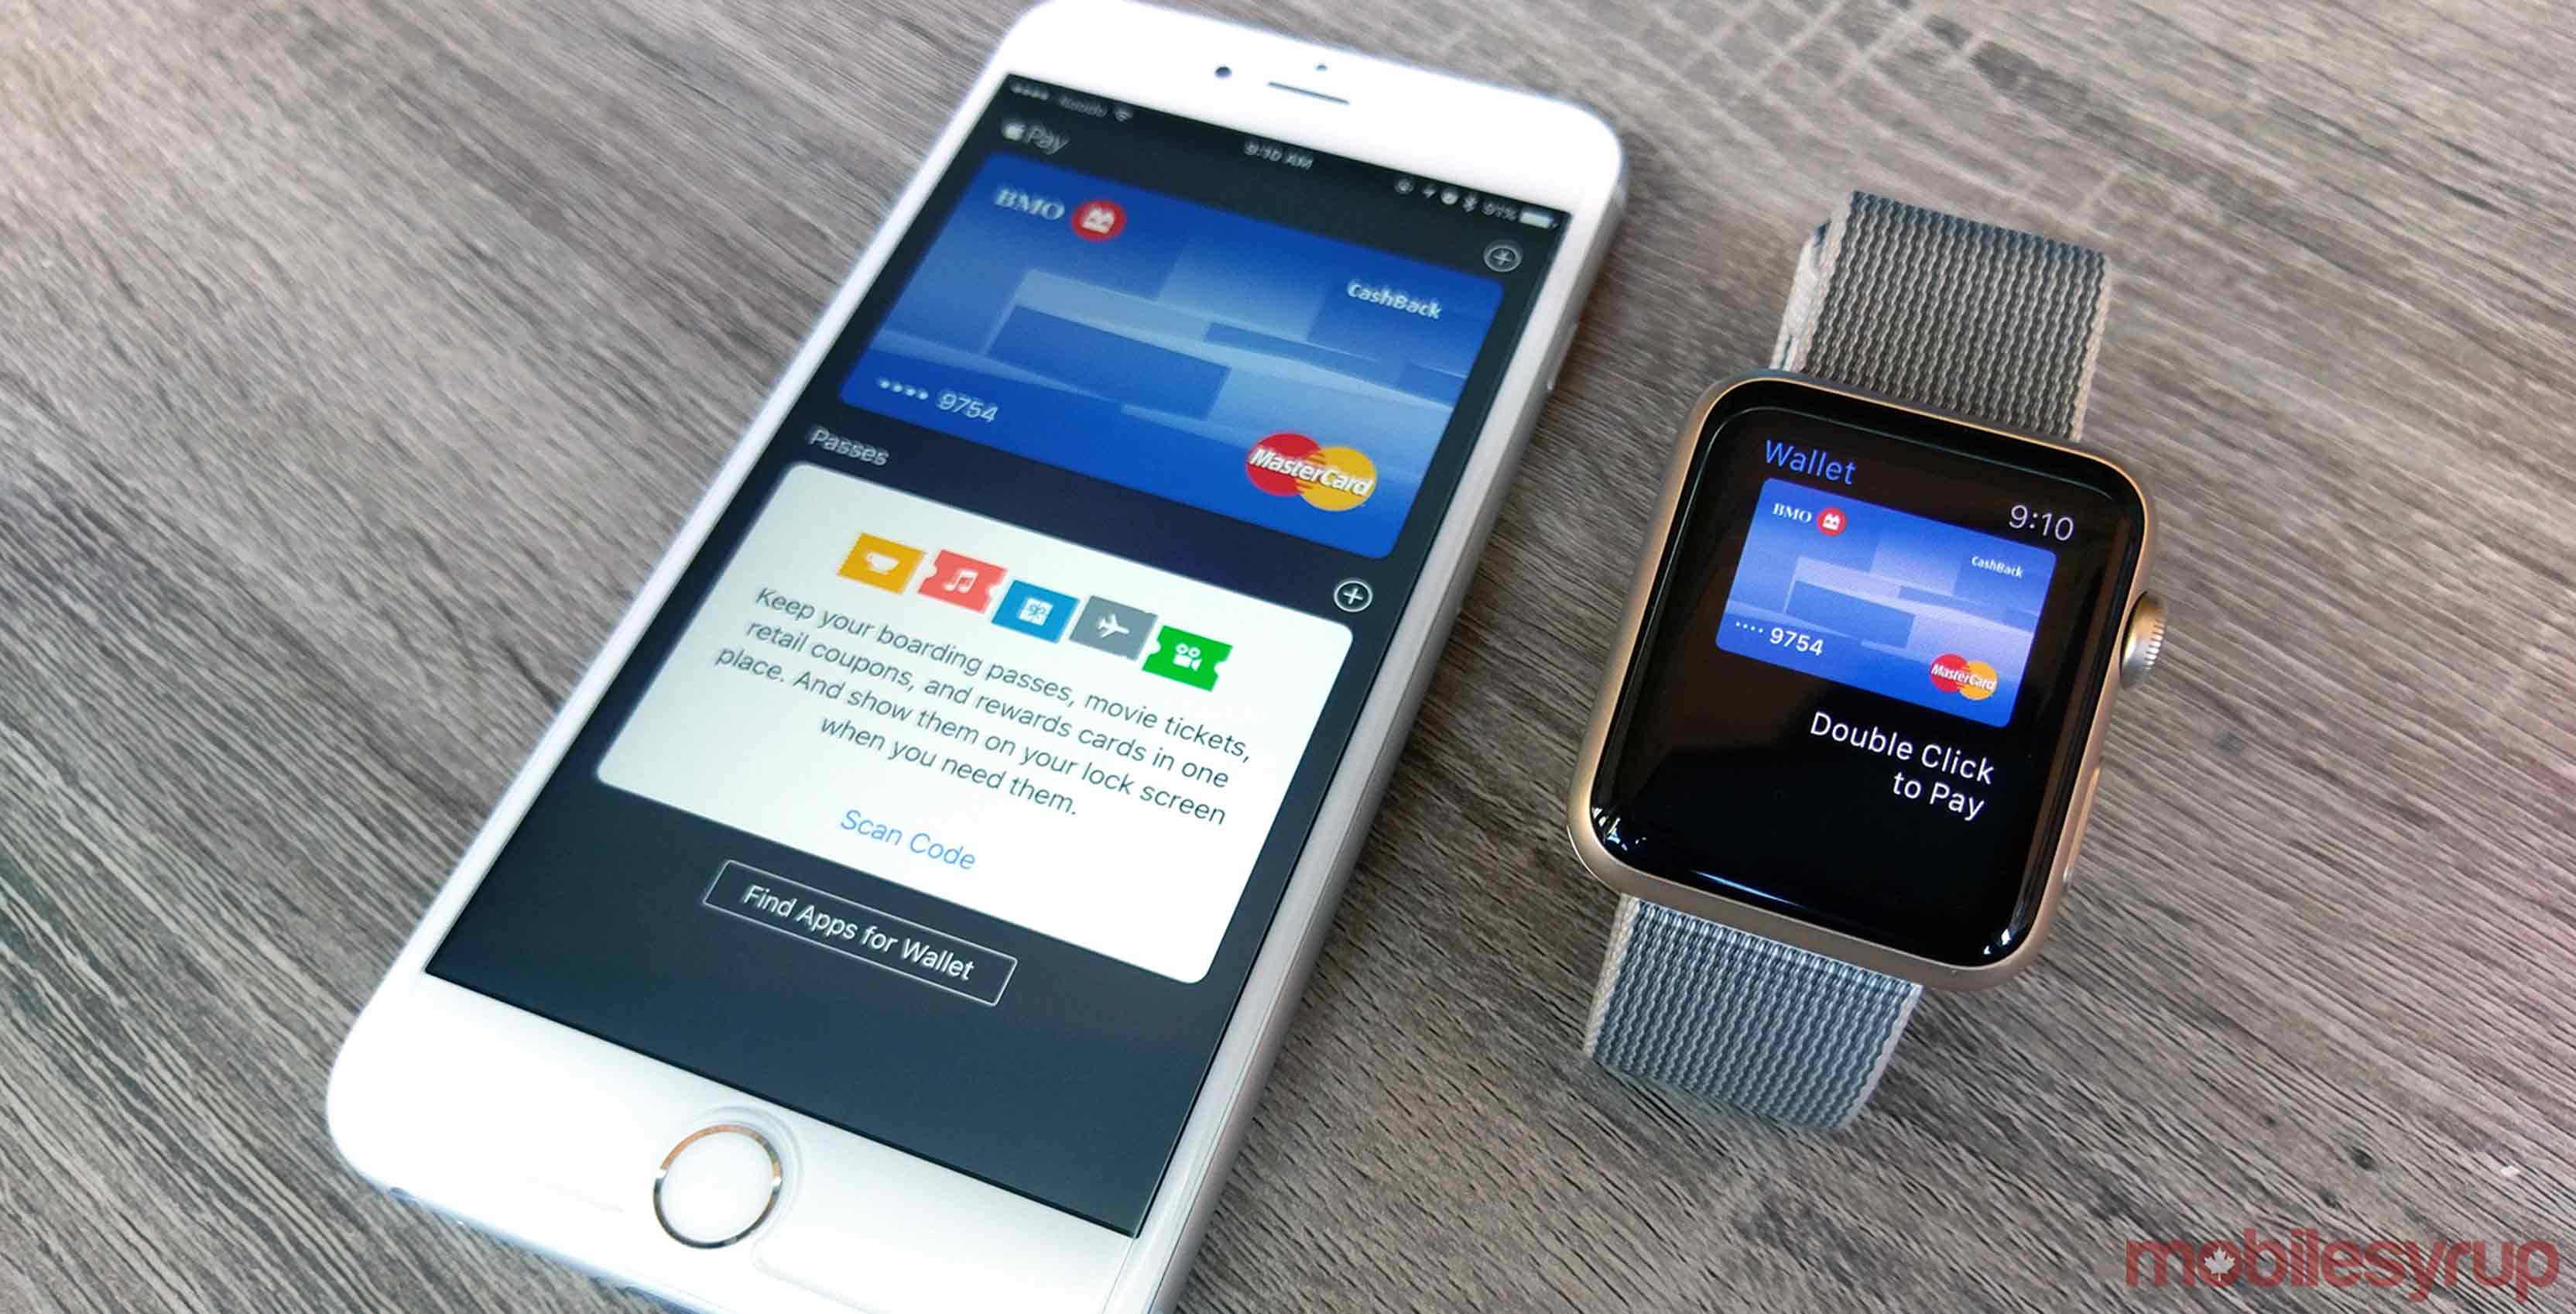 BMO Bank of Montreal card in Apple Pay